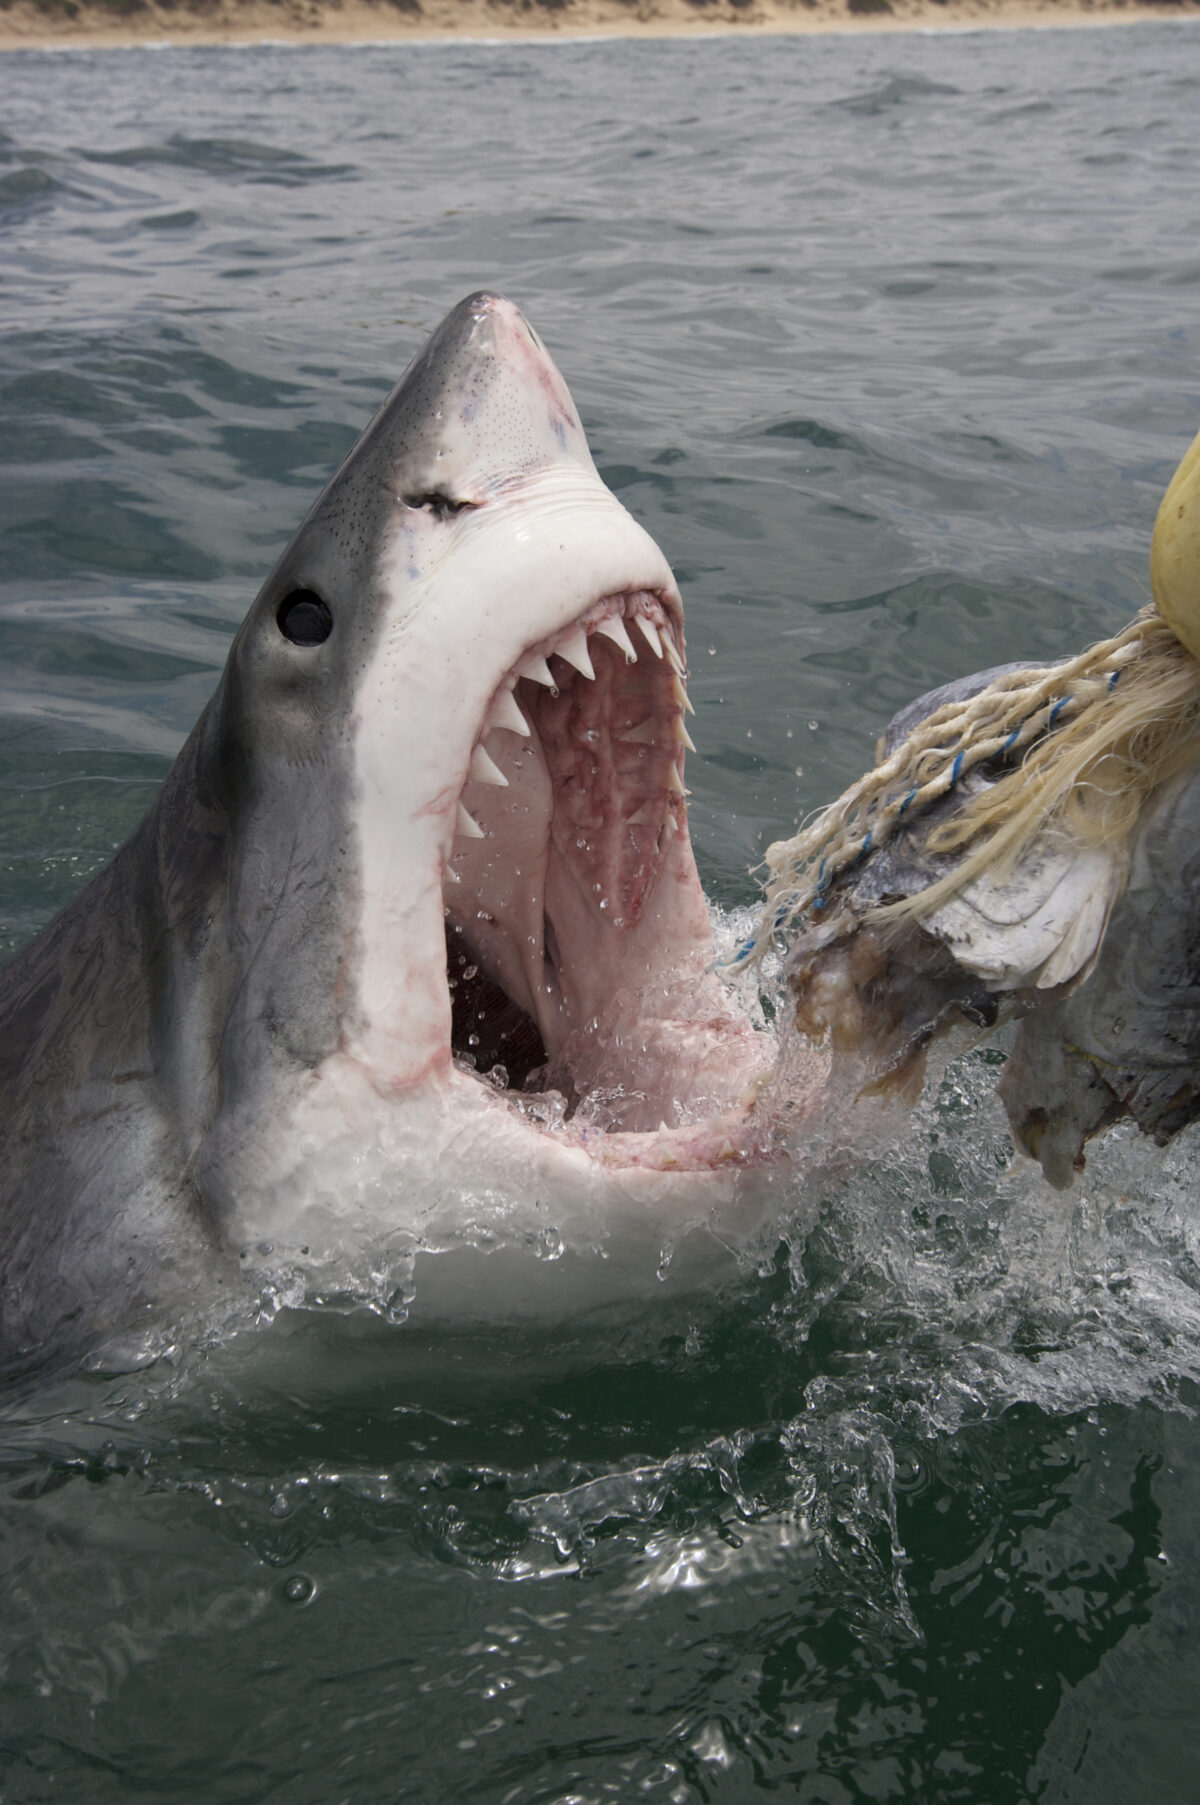 Celebrate Shark Week 2023 with 11 jaw-dropping photos of sharks